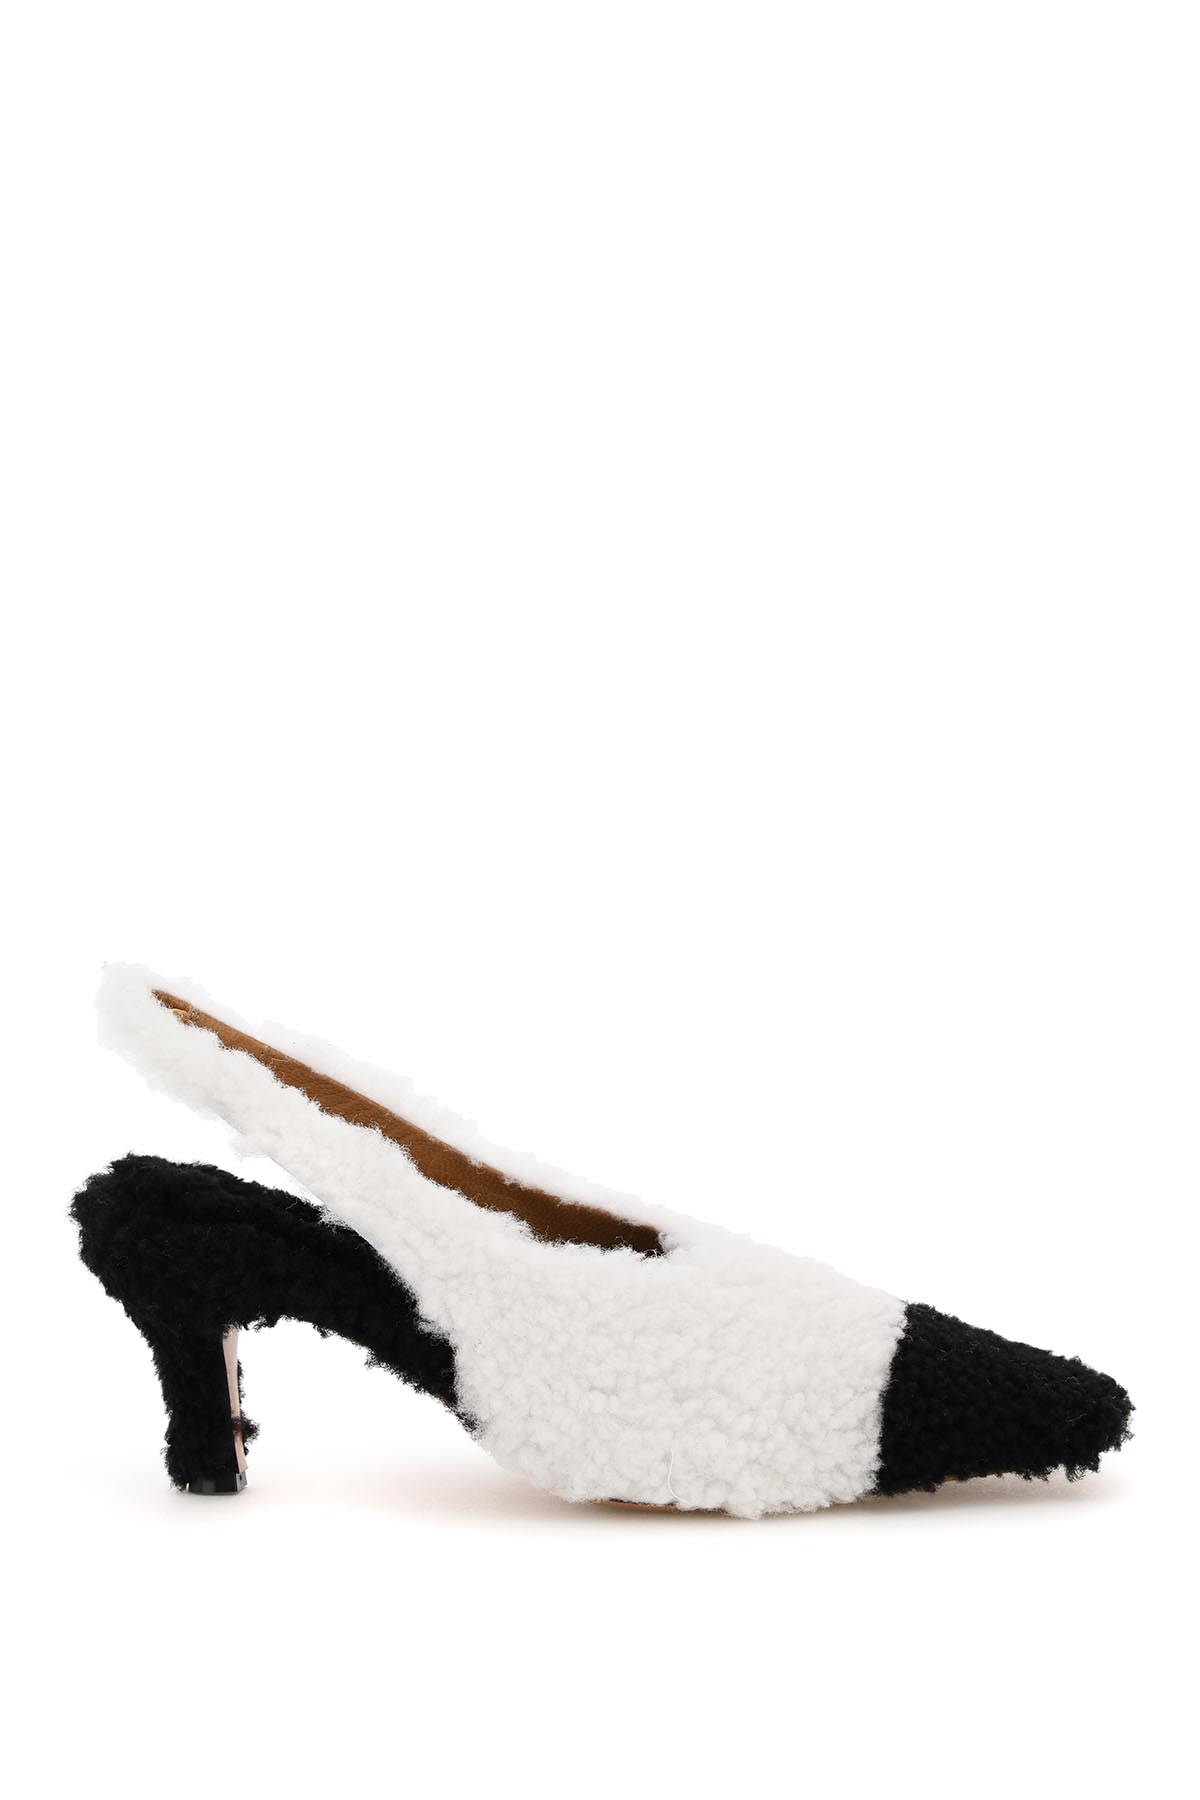 Buy Marni Two-tone Shearling Slingback Pumps online, shop Marni shoes with free shipping